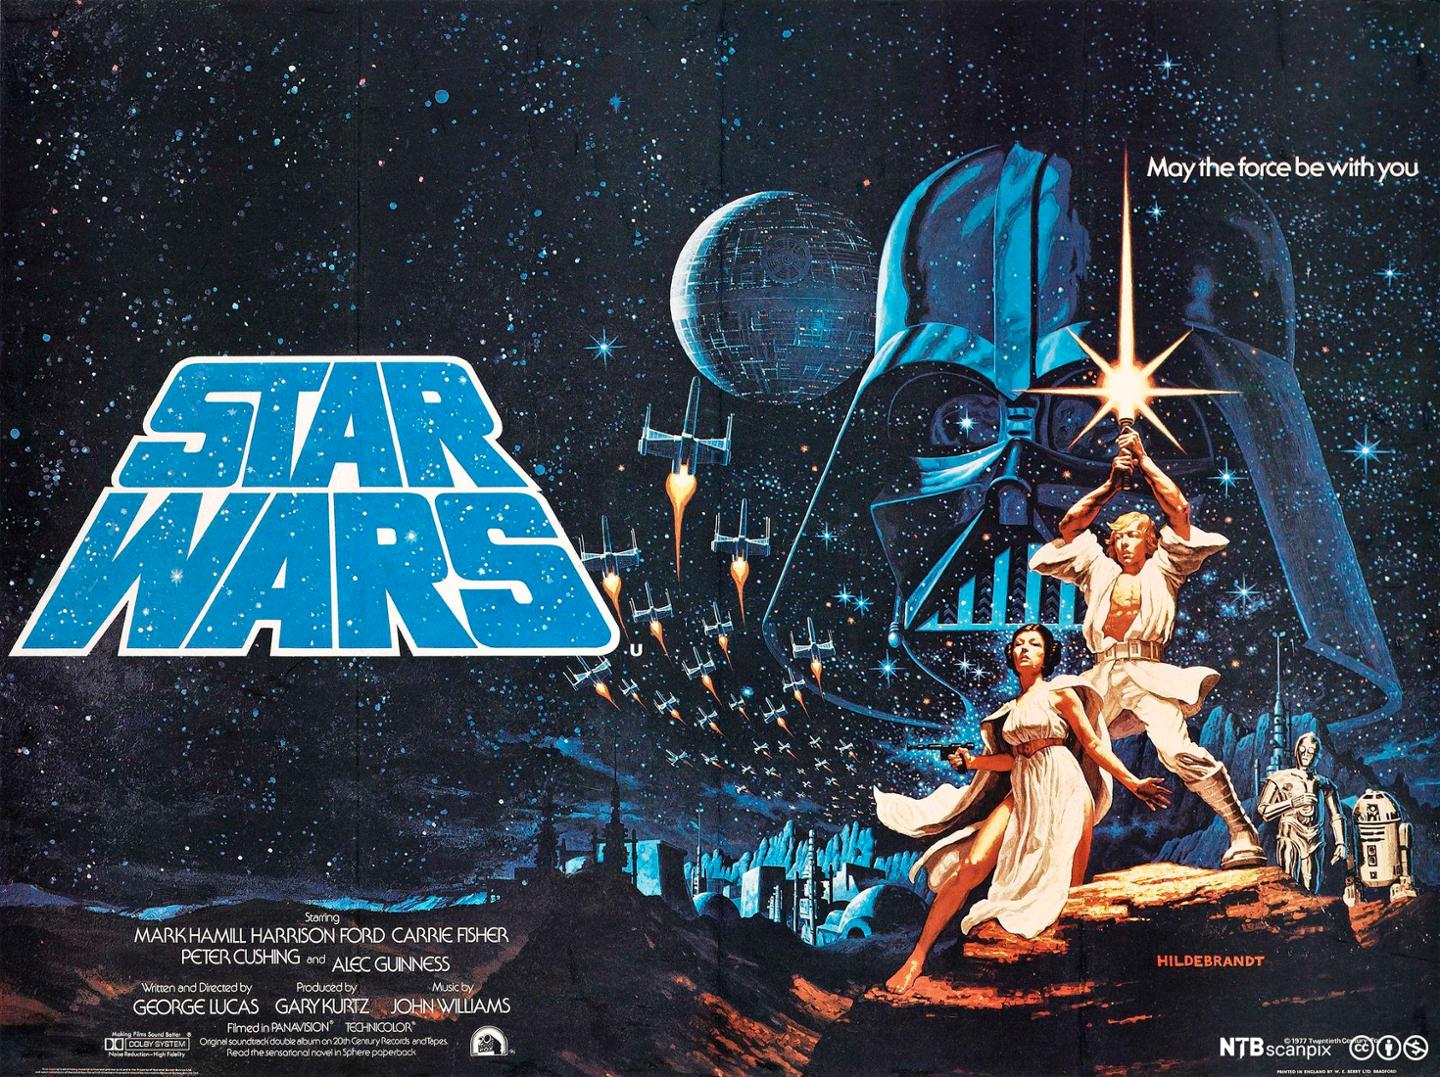 May the Force be with you. - Star Wars 1977